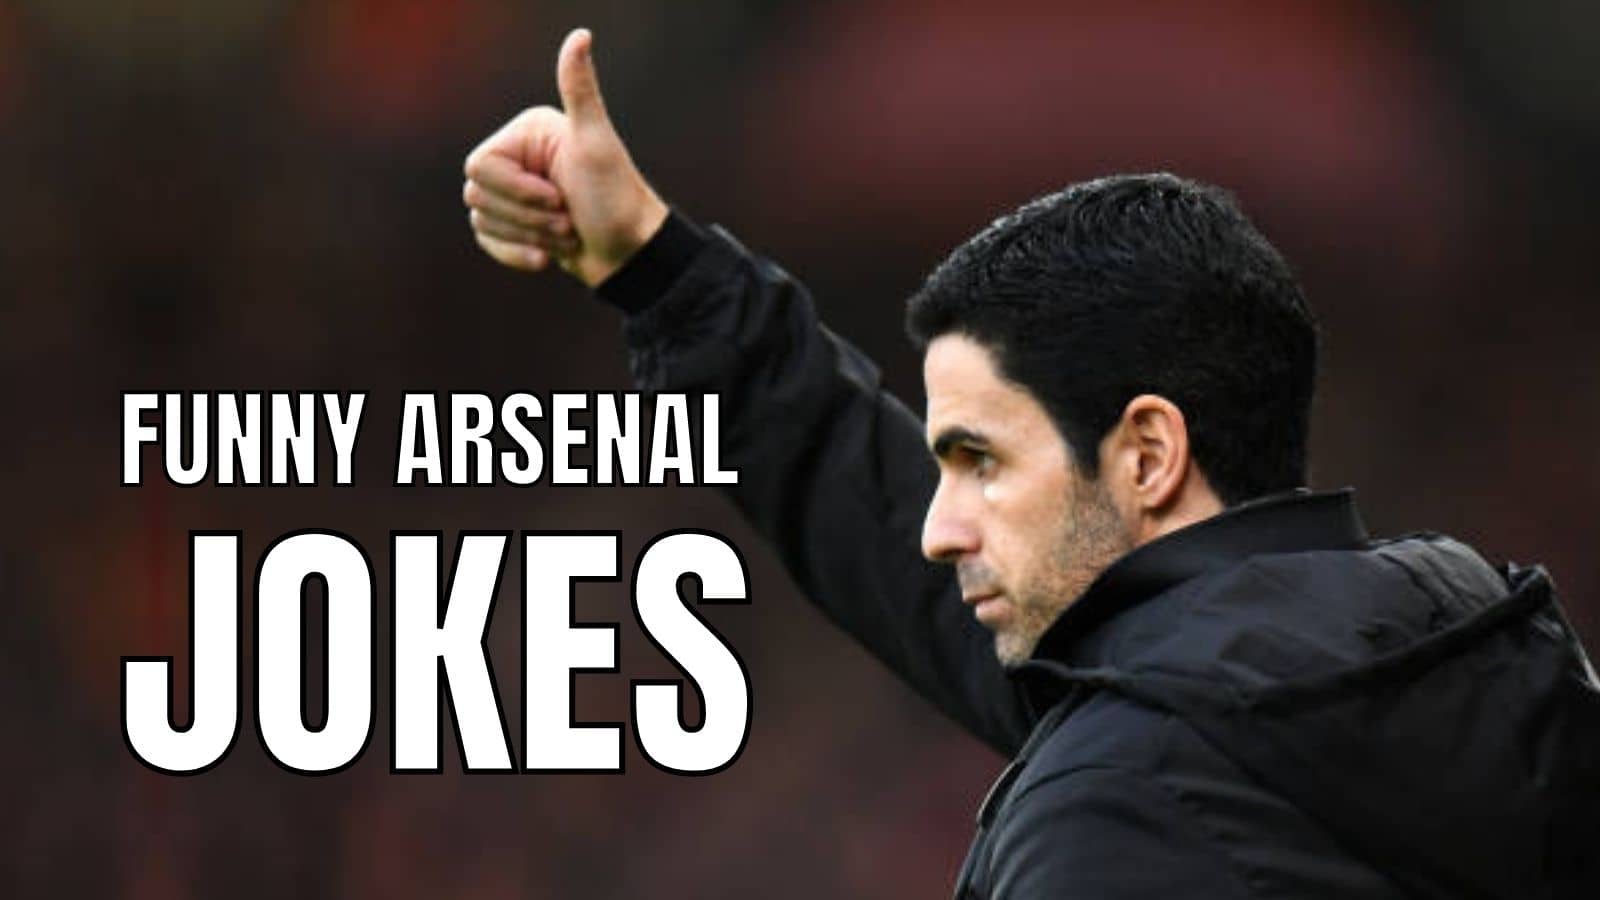 210+ Hilarious Jokes About Arsenal For Instagram